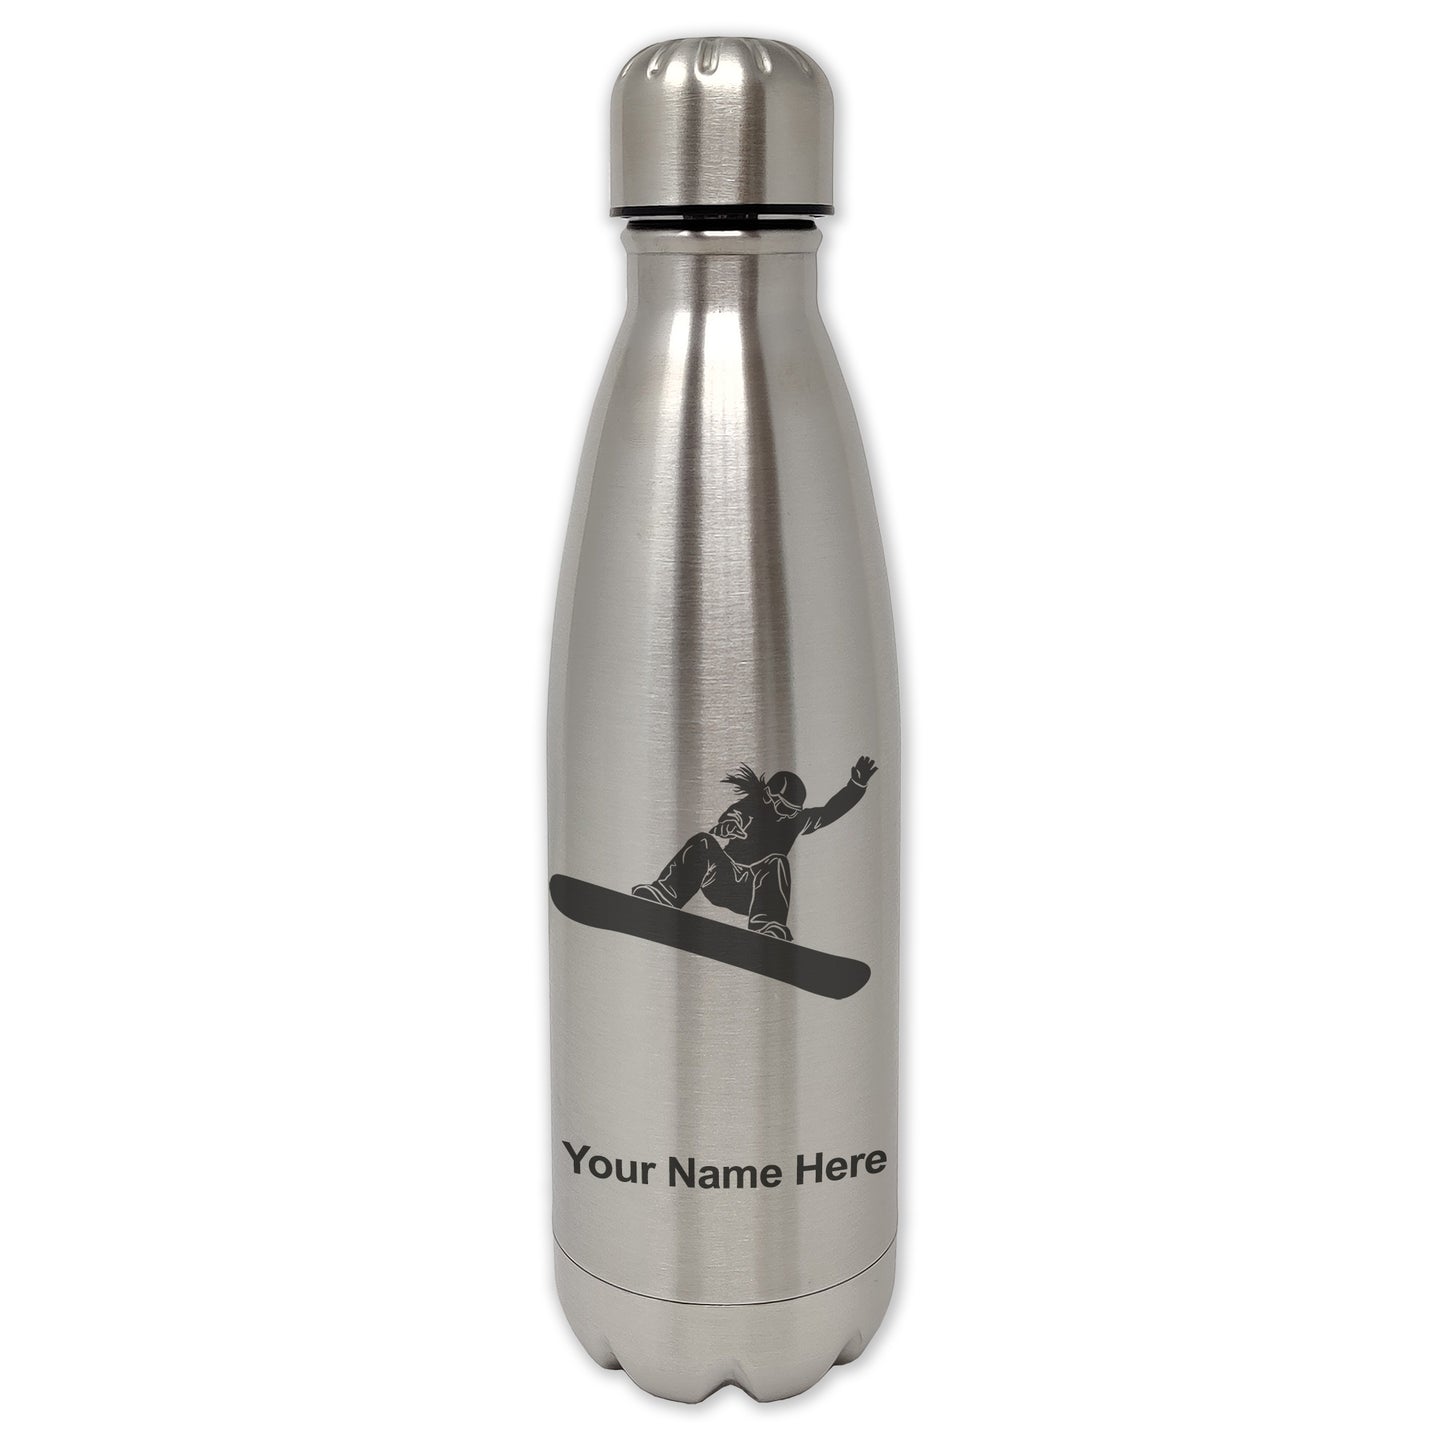 LaserGram Single Wall Water Bottle, Snowboarder Woman, Personalized Engraving Included